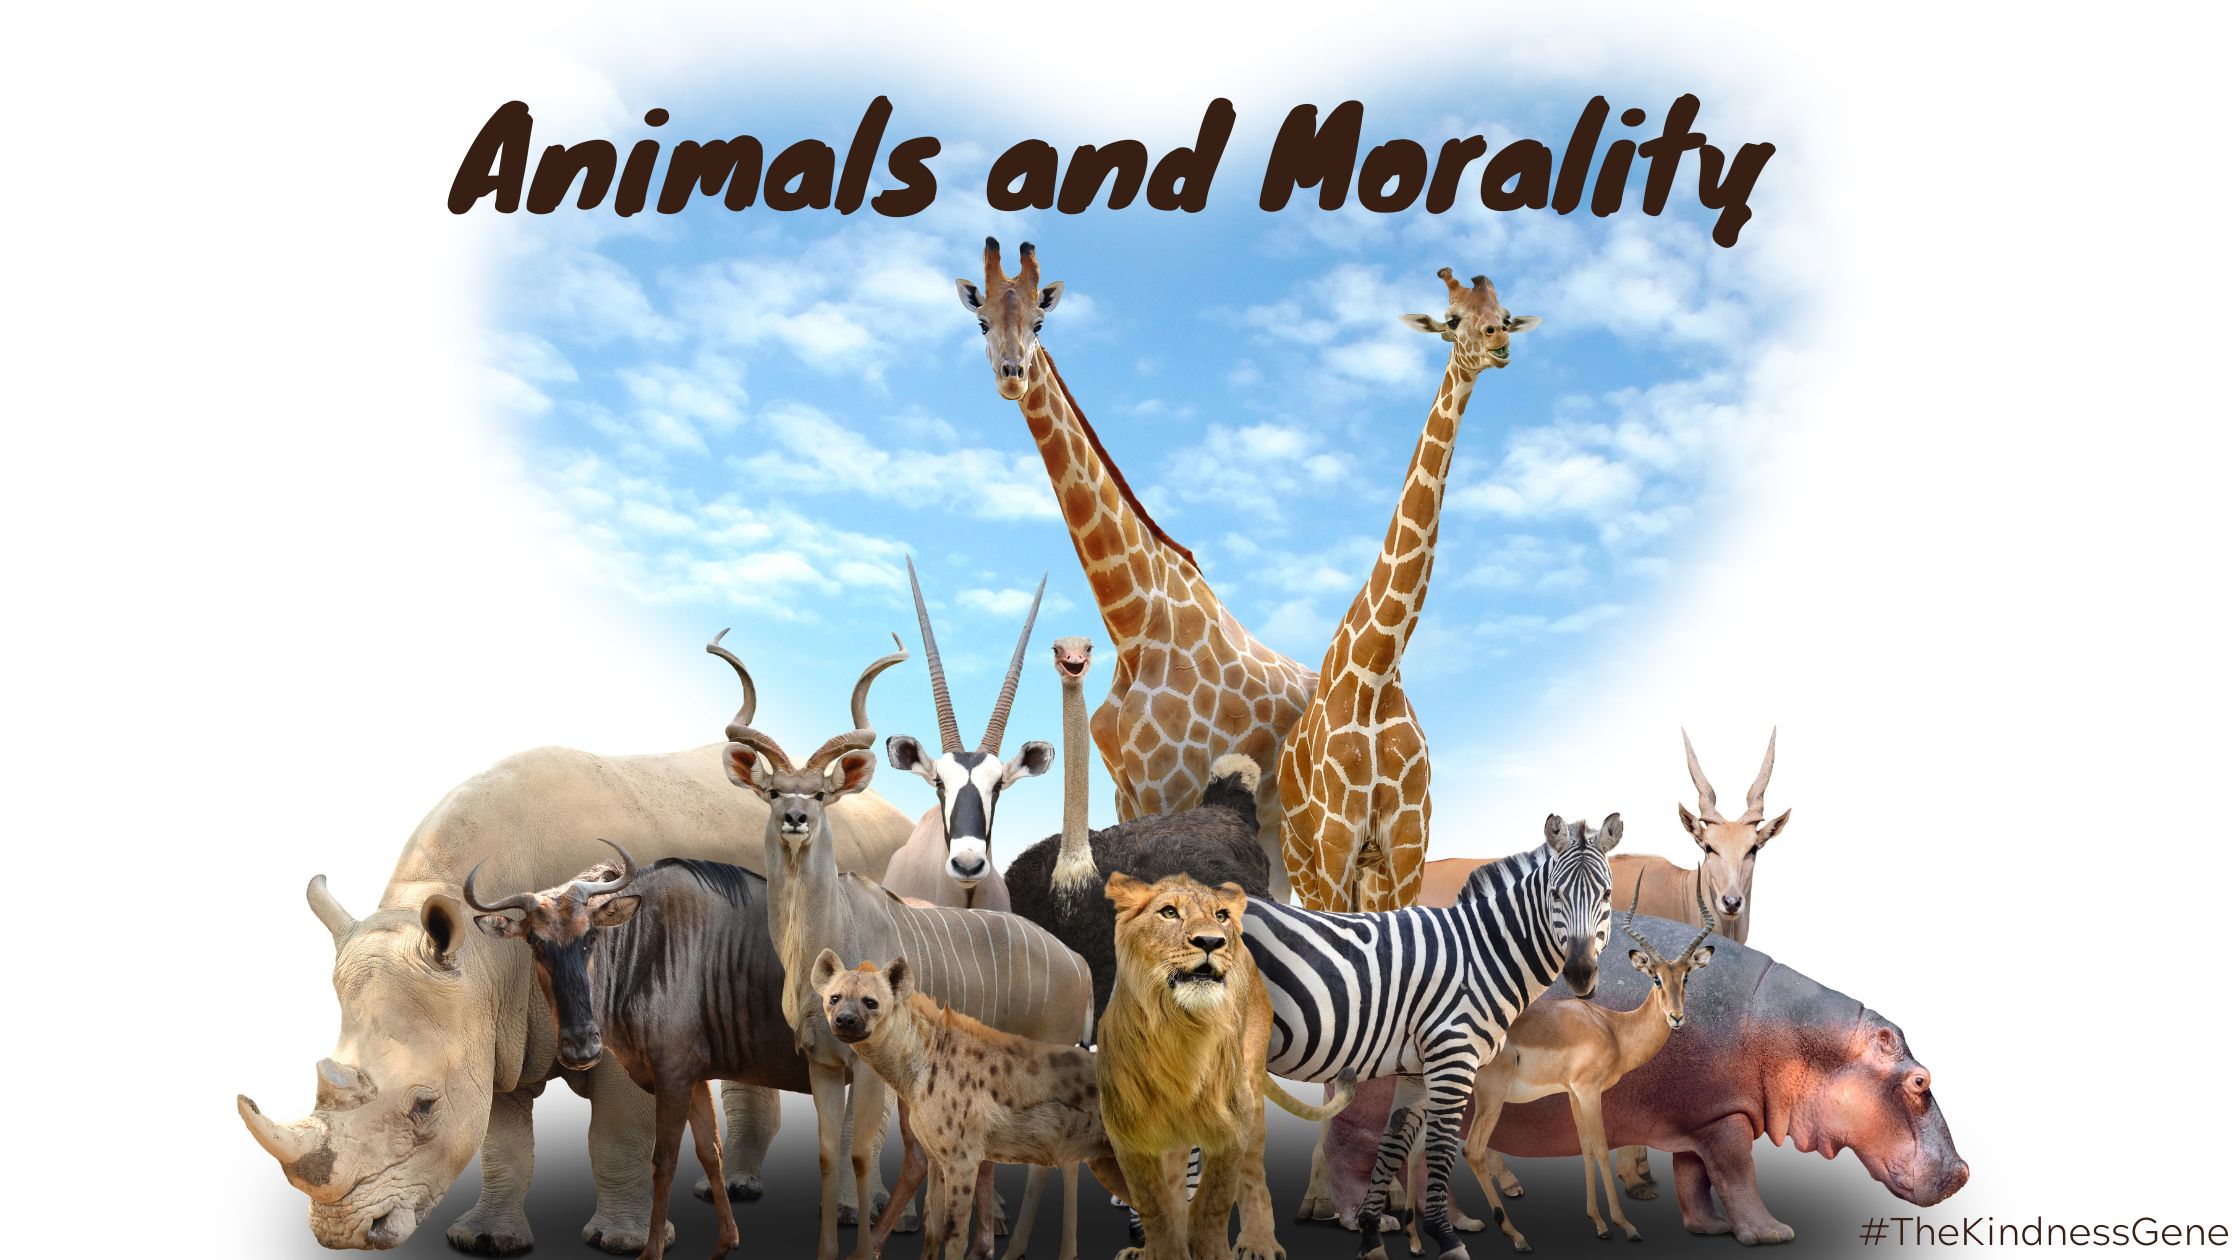 Animals and Morality